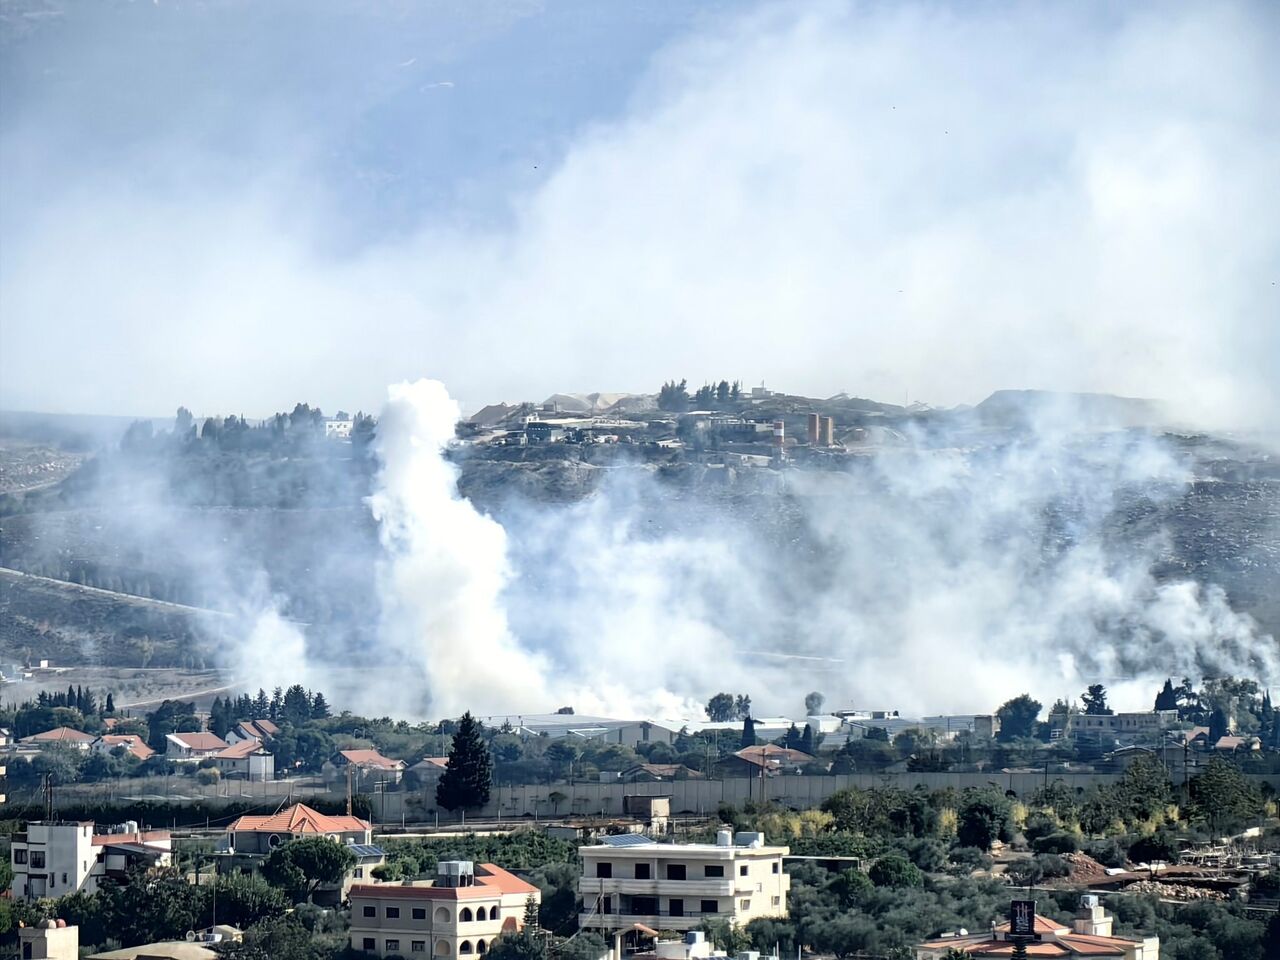 Hezbollah attacks Israeli targets in north of occupied Palestine